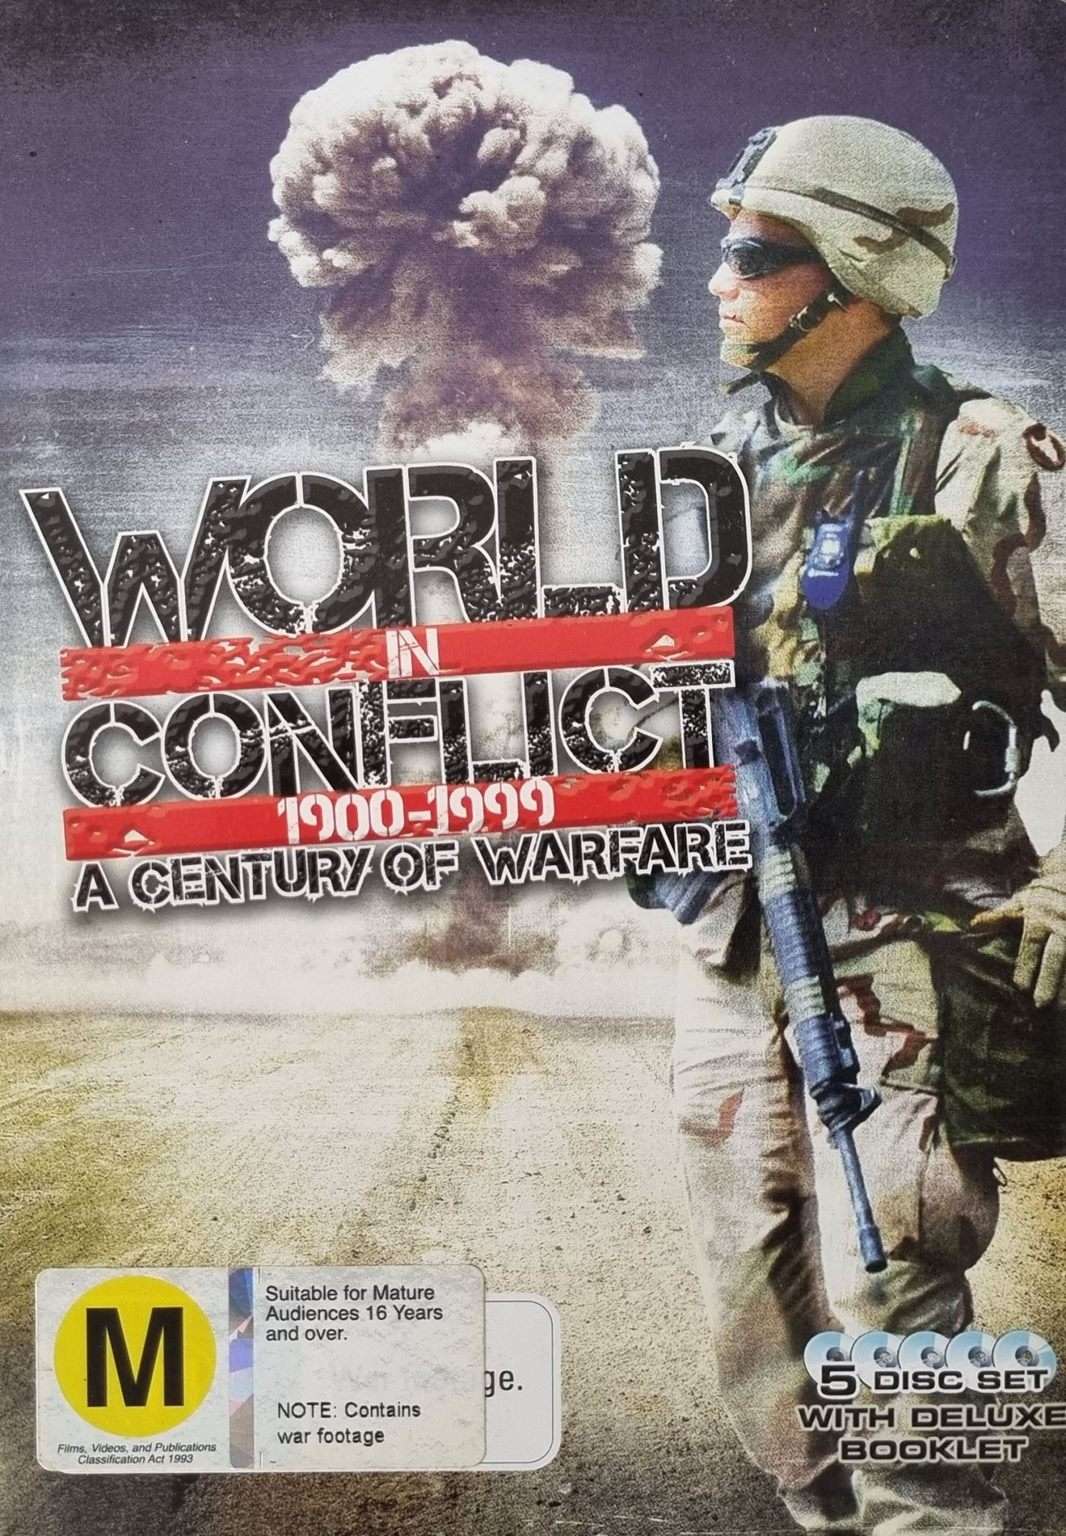 World in Conflict: 1900-1999 A Century of Warfare 5 Disc Set